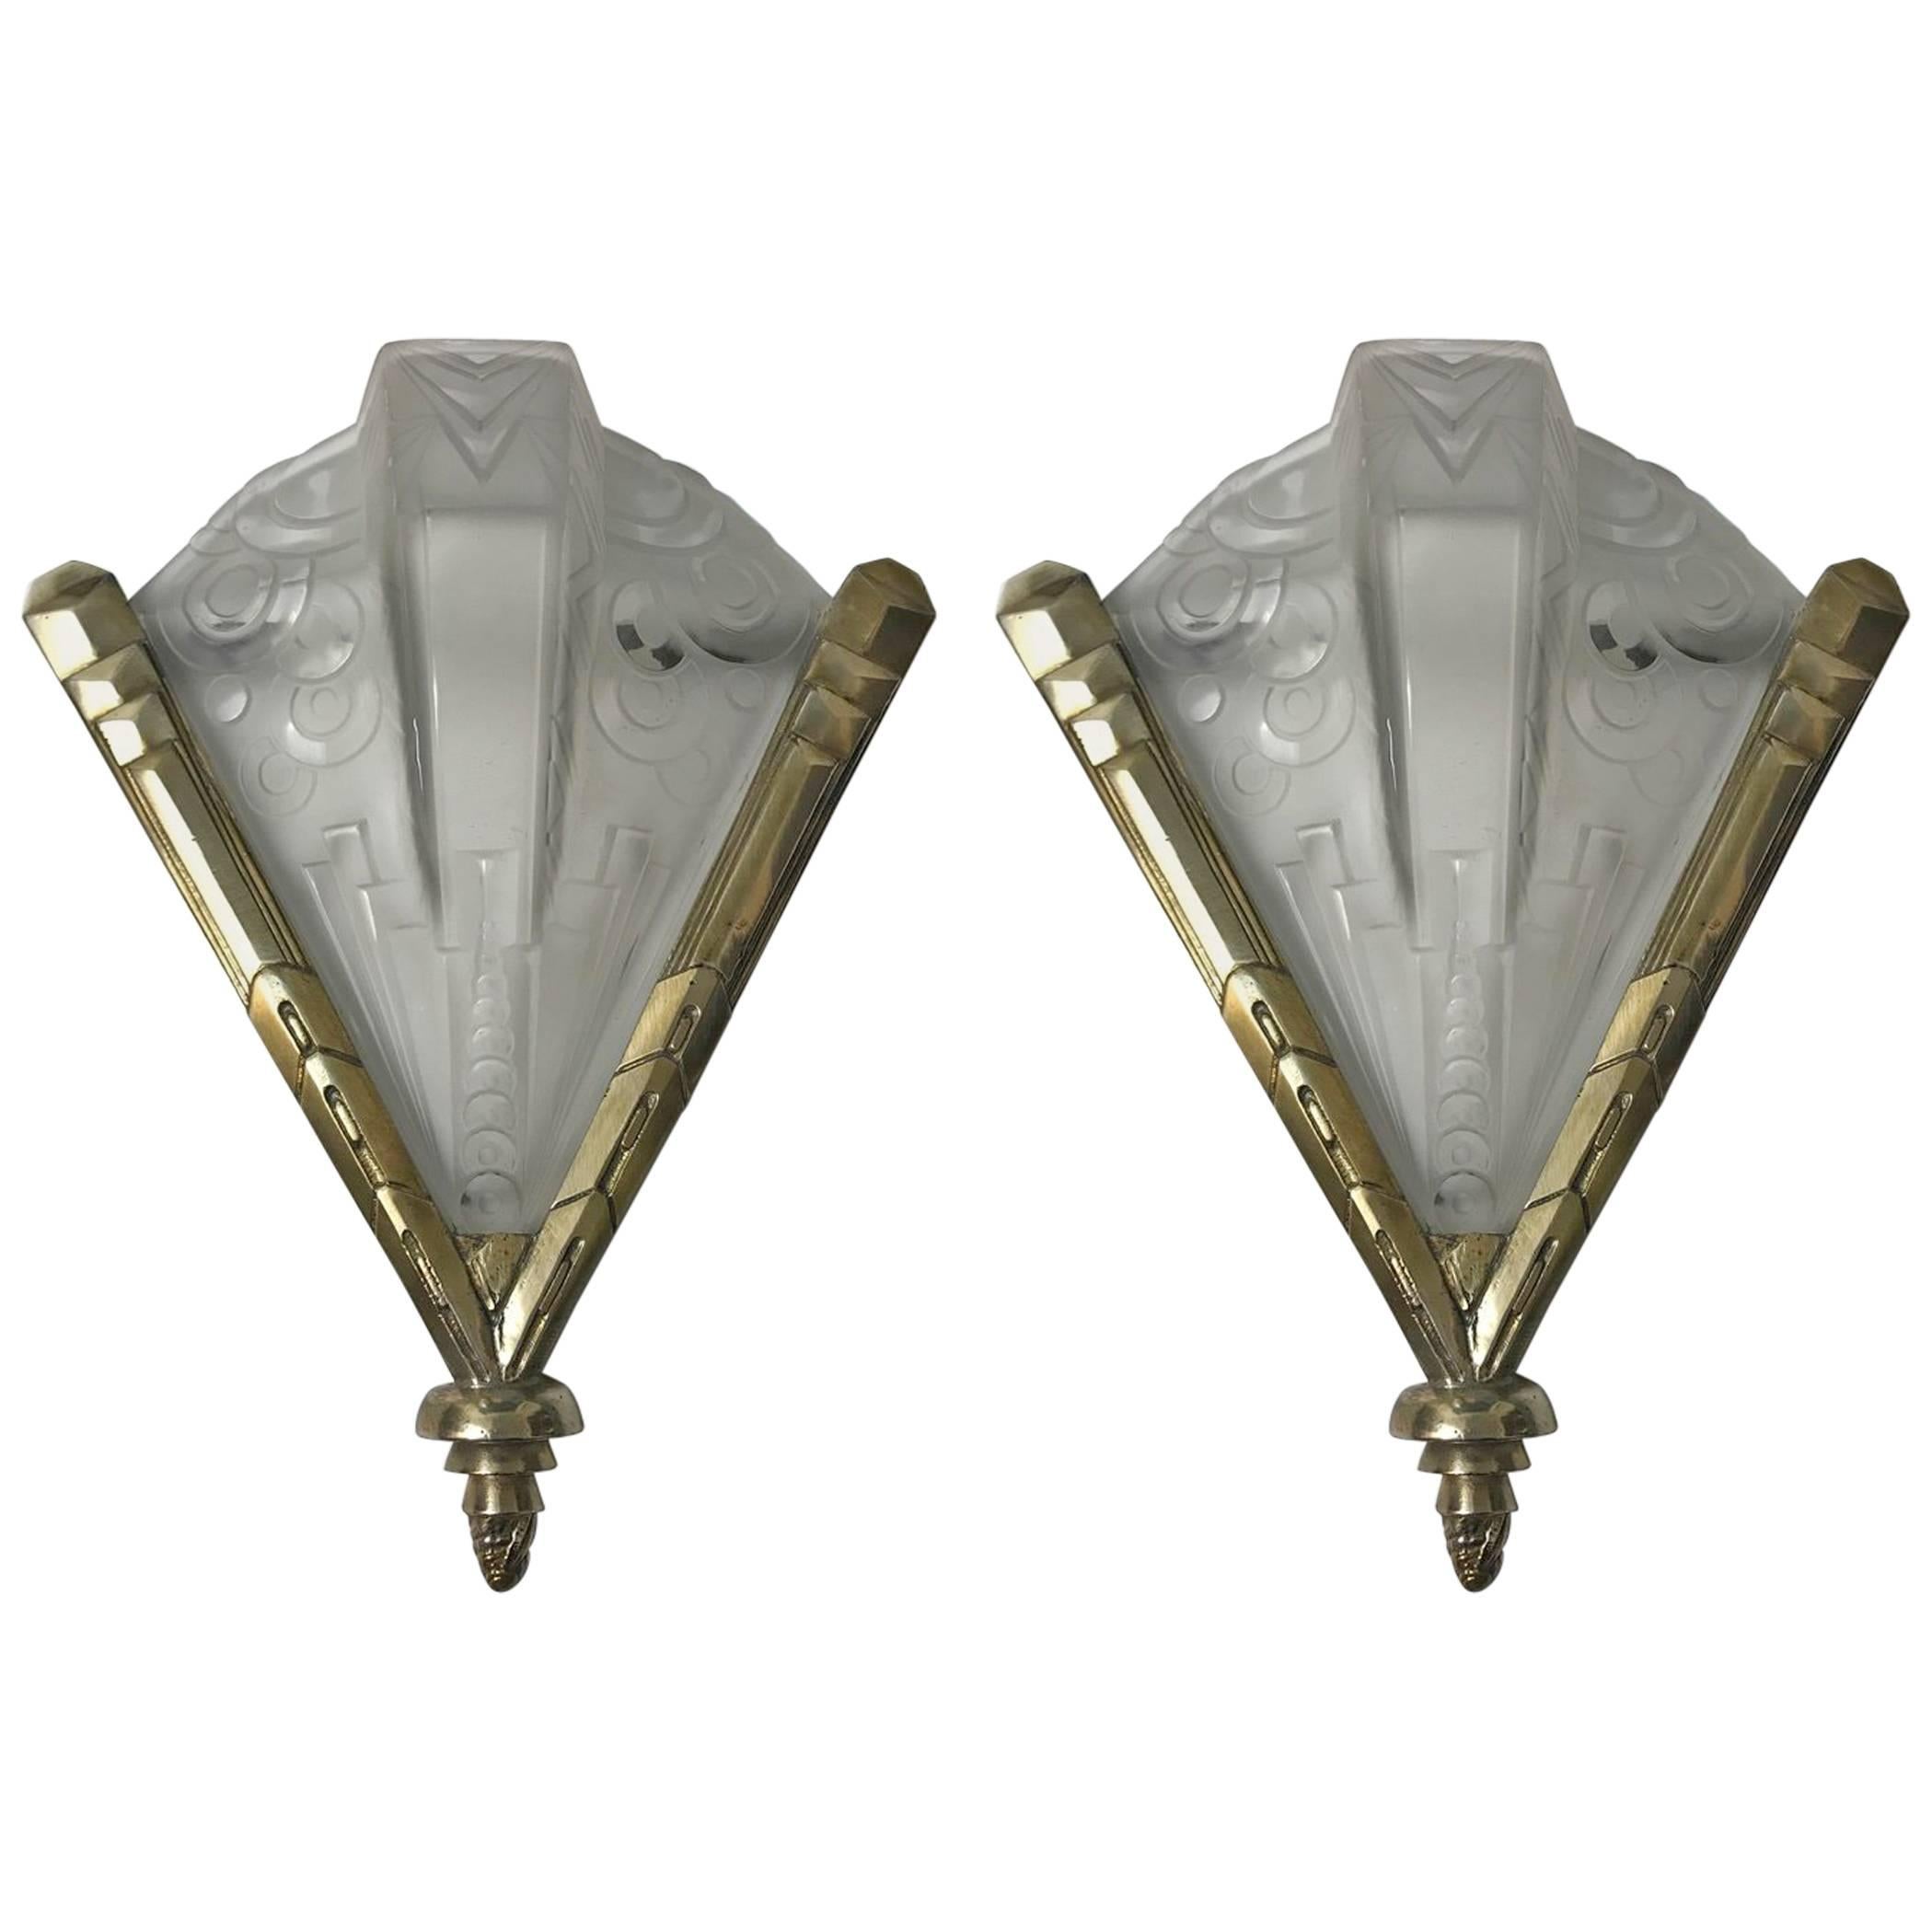 Pair of French Art Deco Geometric Sconces Signed by Muller Frères